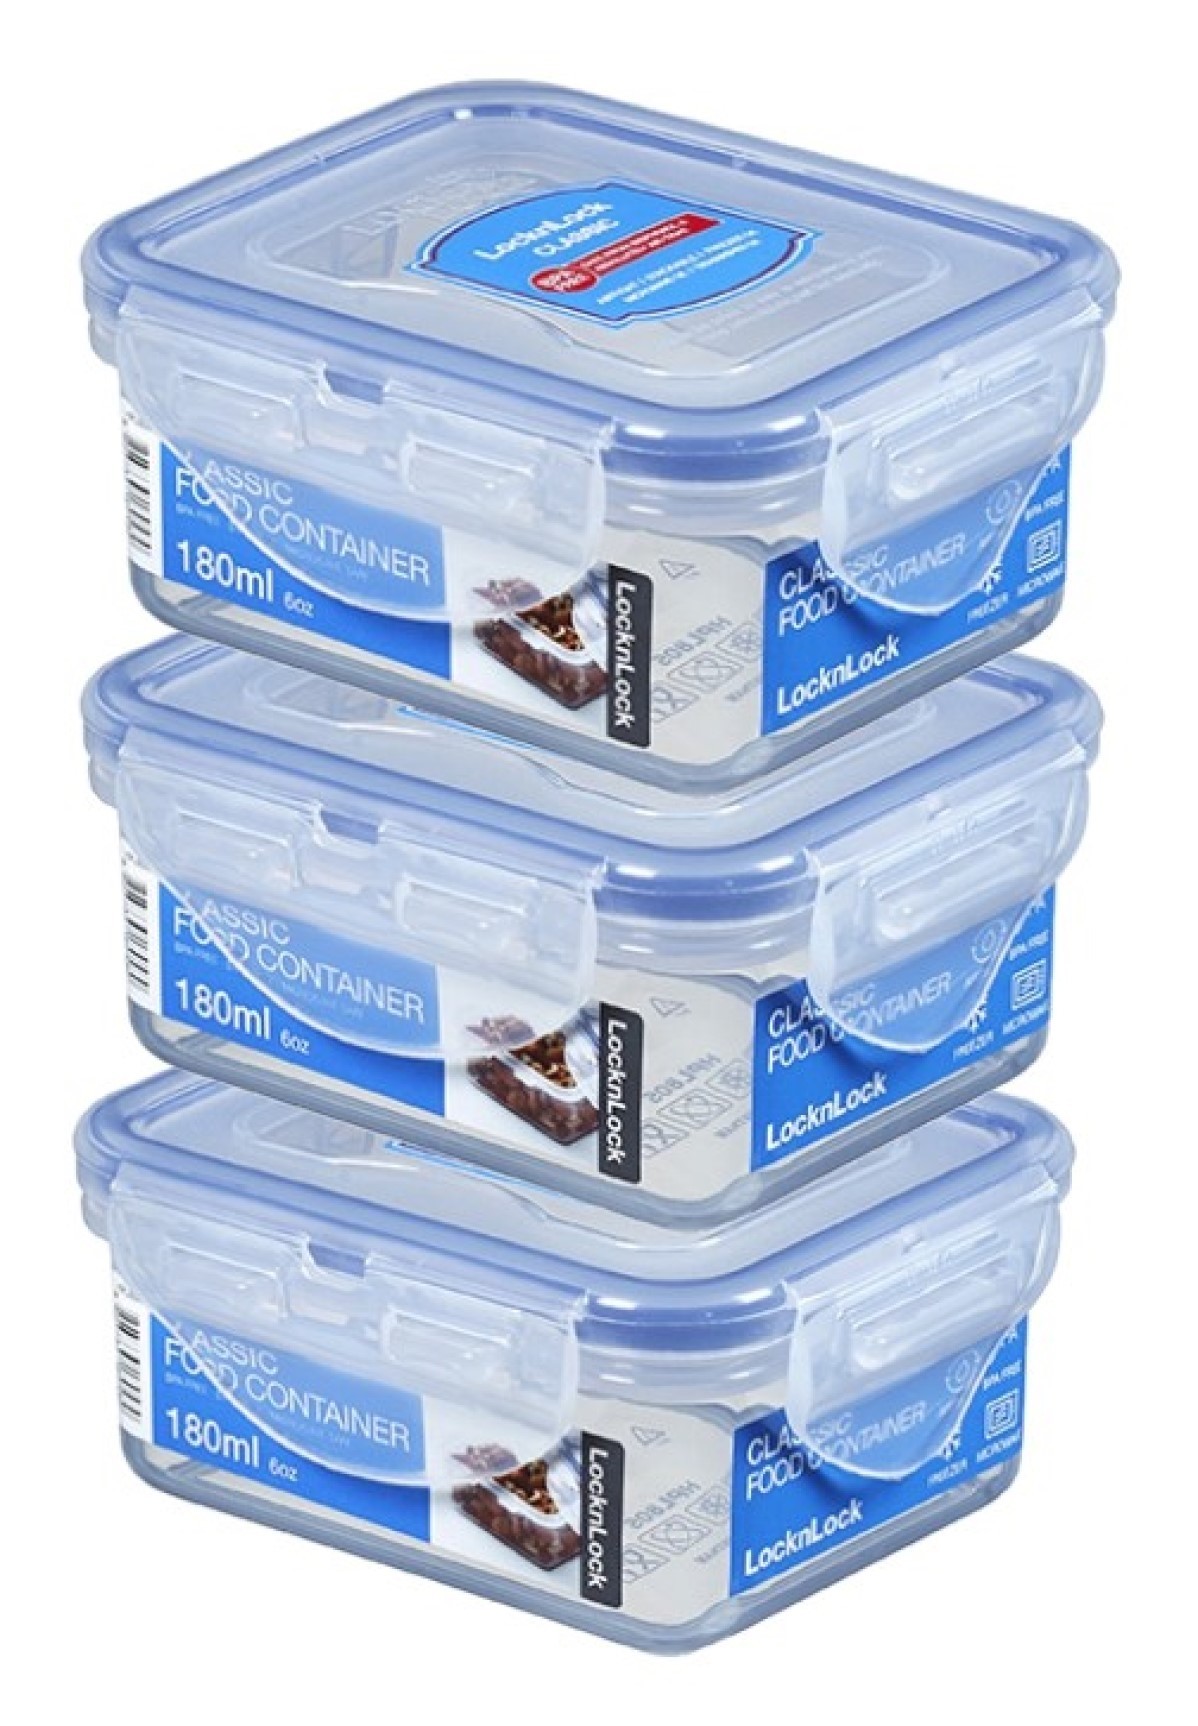 HPL805 110 x 90 x 48mm 3x Lock and & Lock Food Storage Container 180ml 